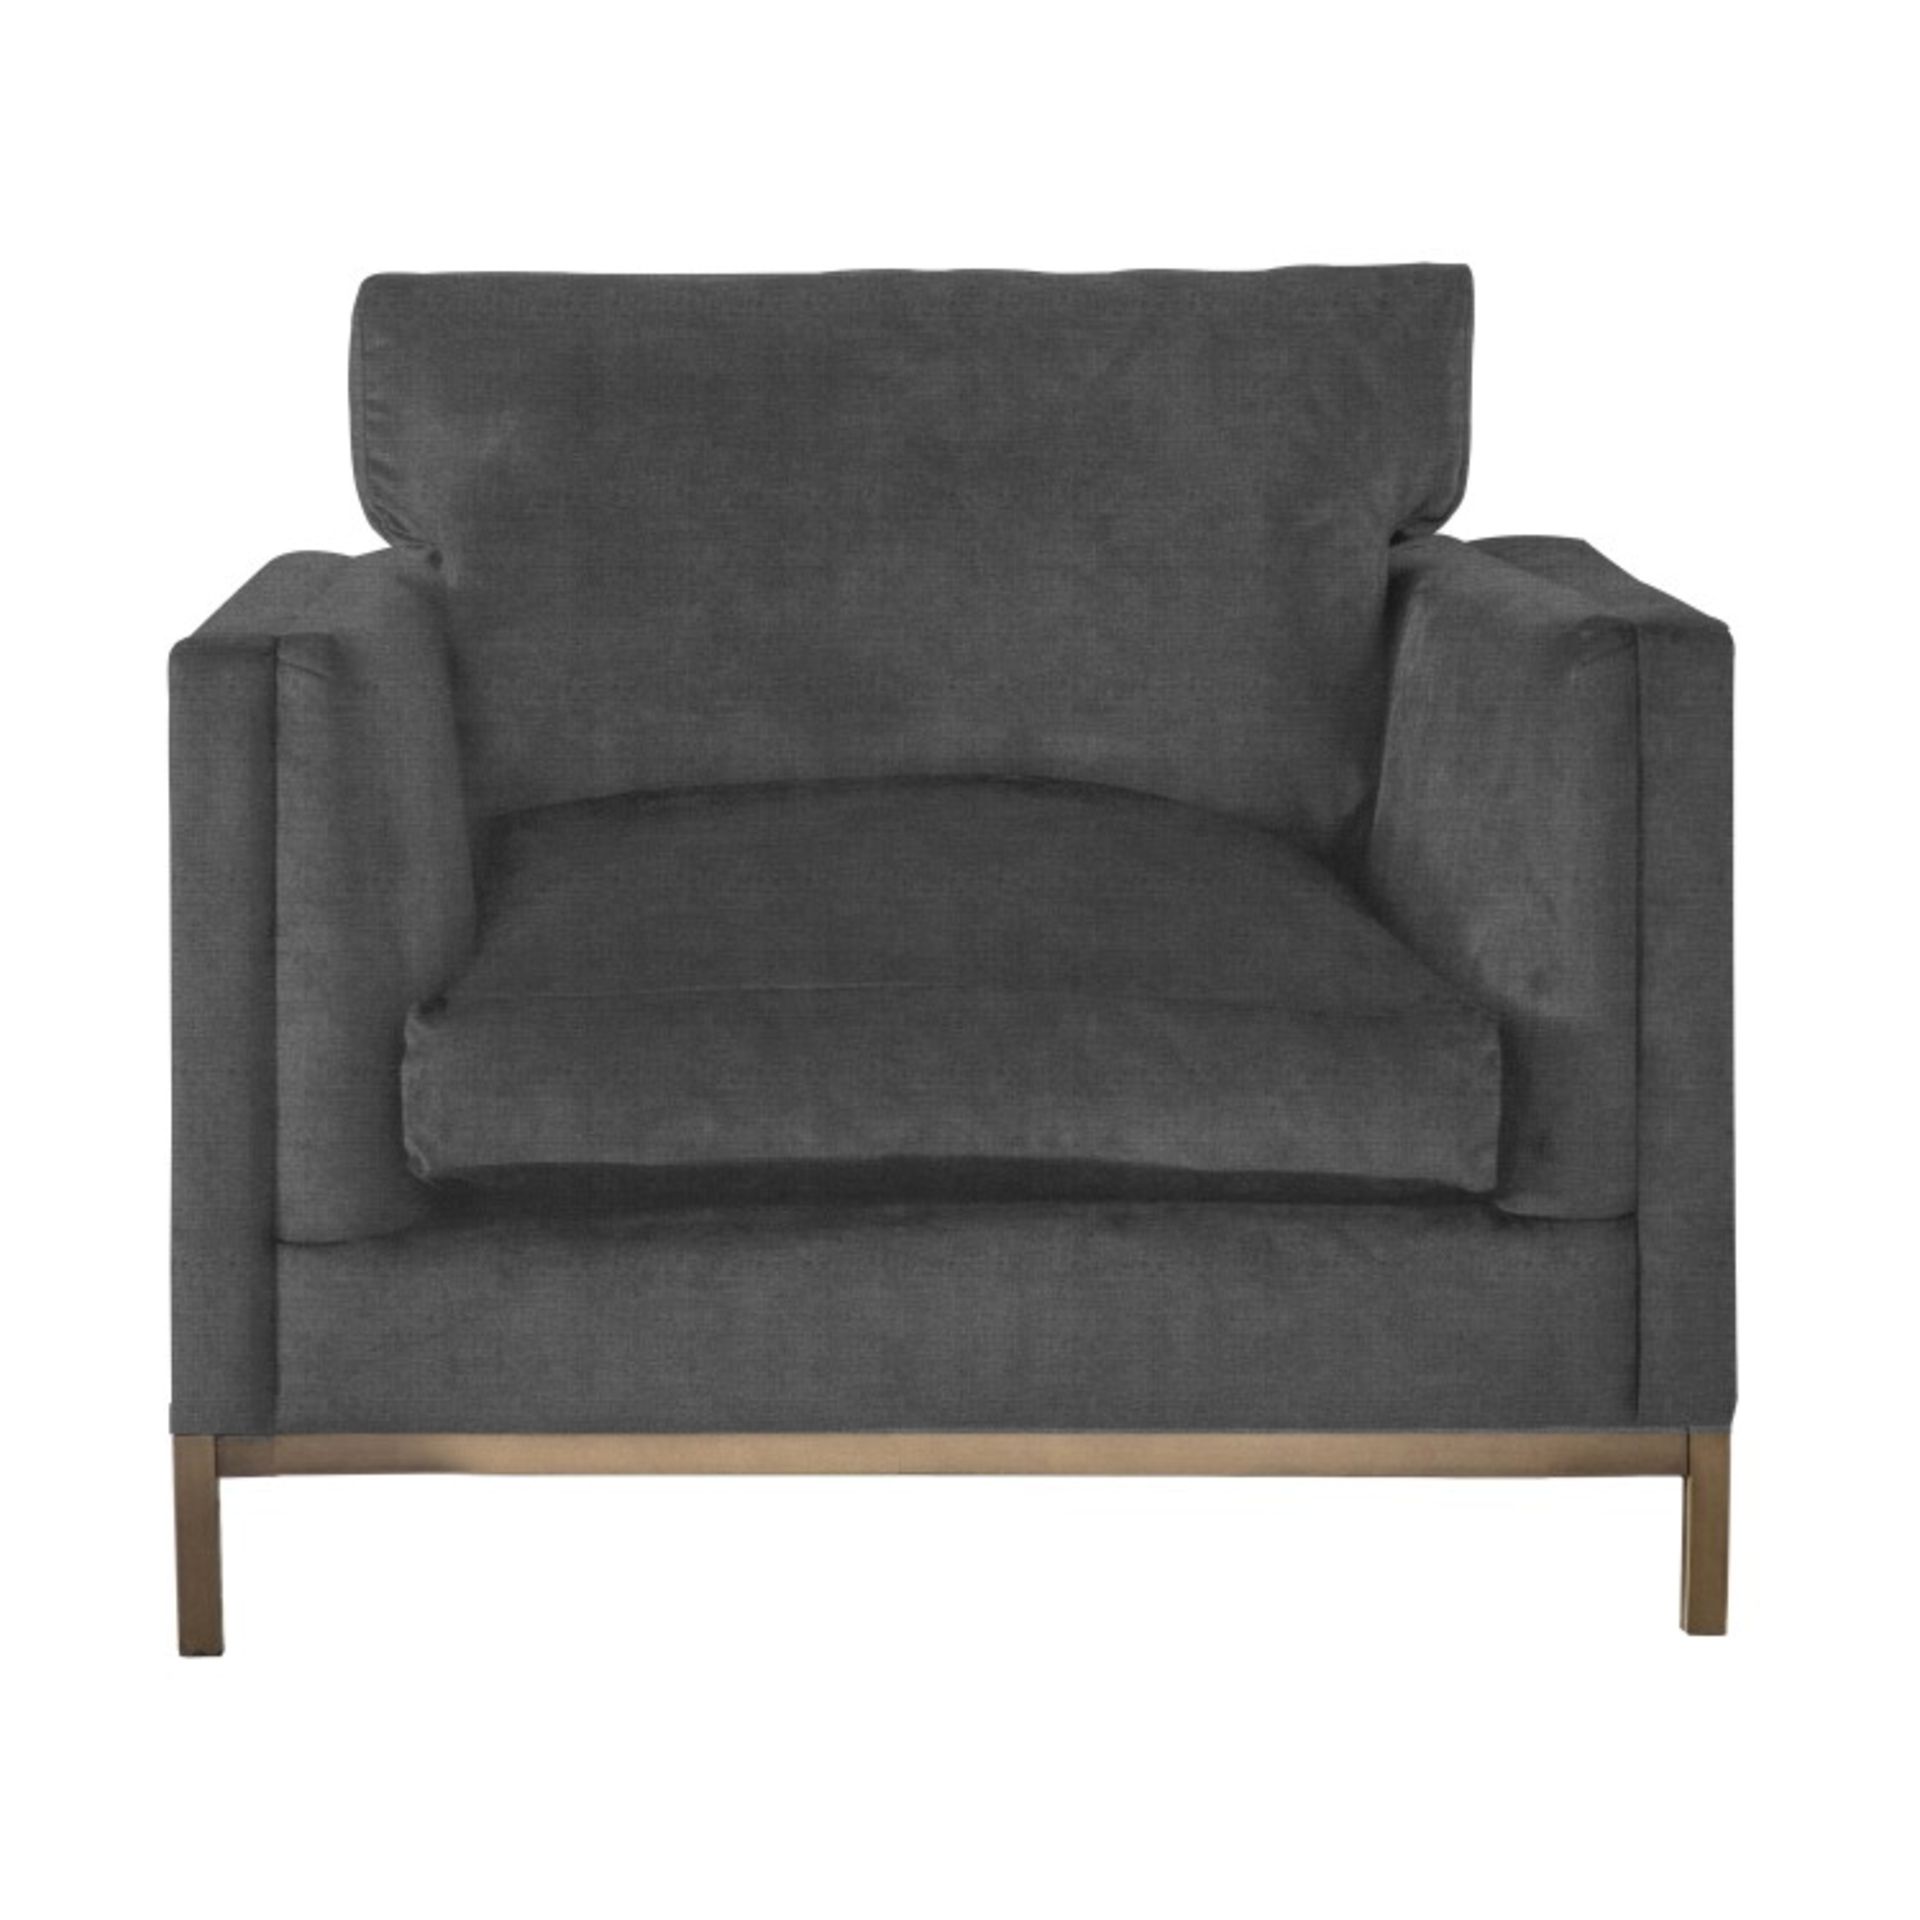 Treyford Armchair Berwick Steel The Treyford collection is one of our most impressive. Experience - Image 2 of 2